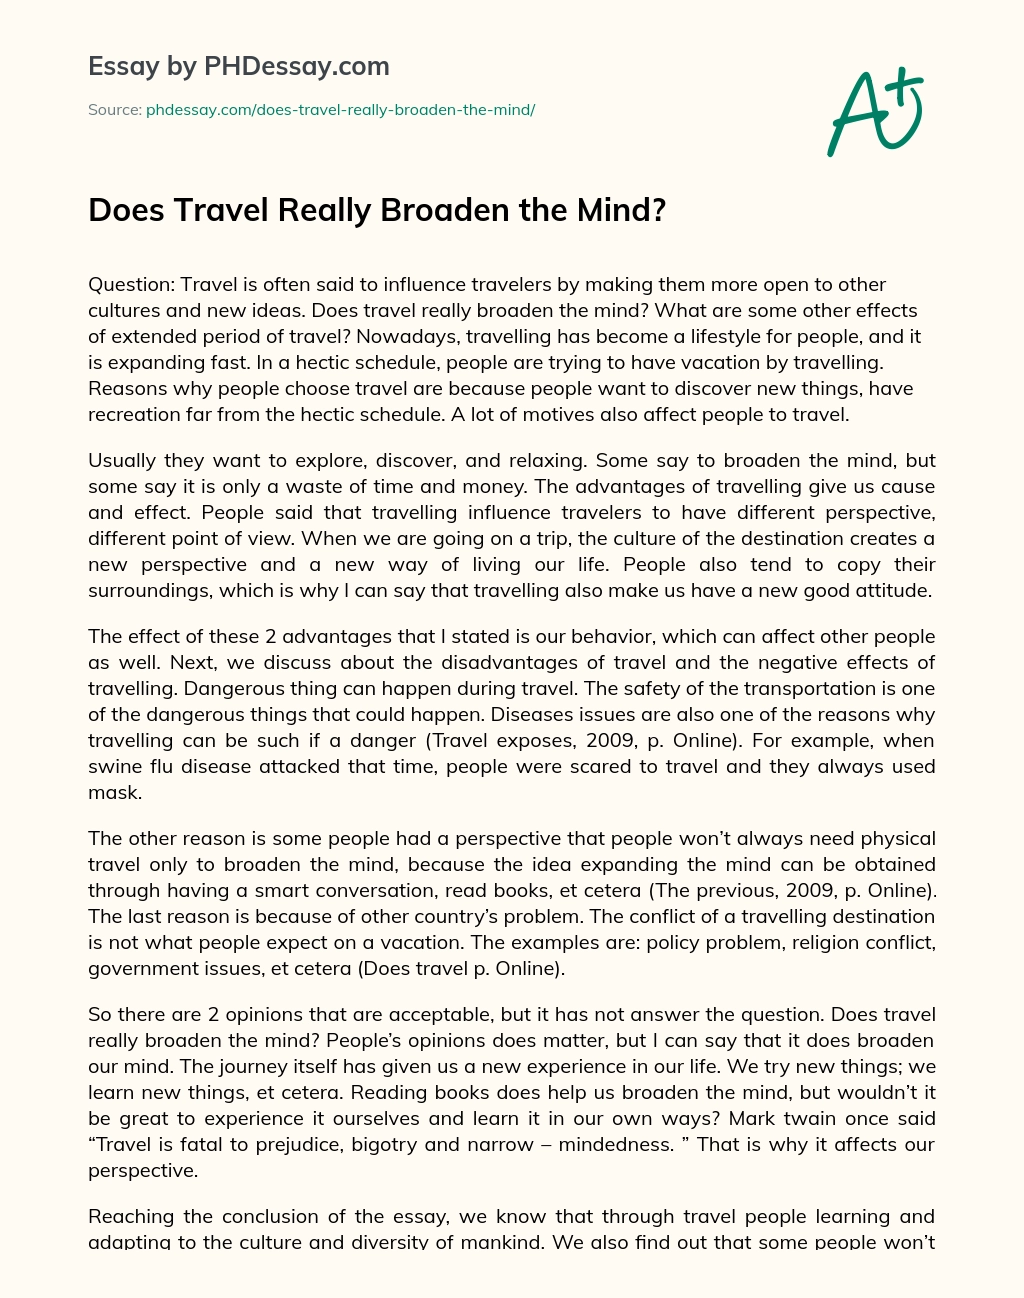 Does Travel Really Broaden the Mind? essay